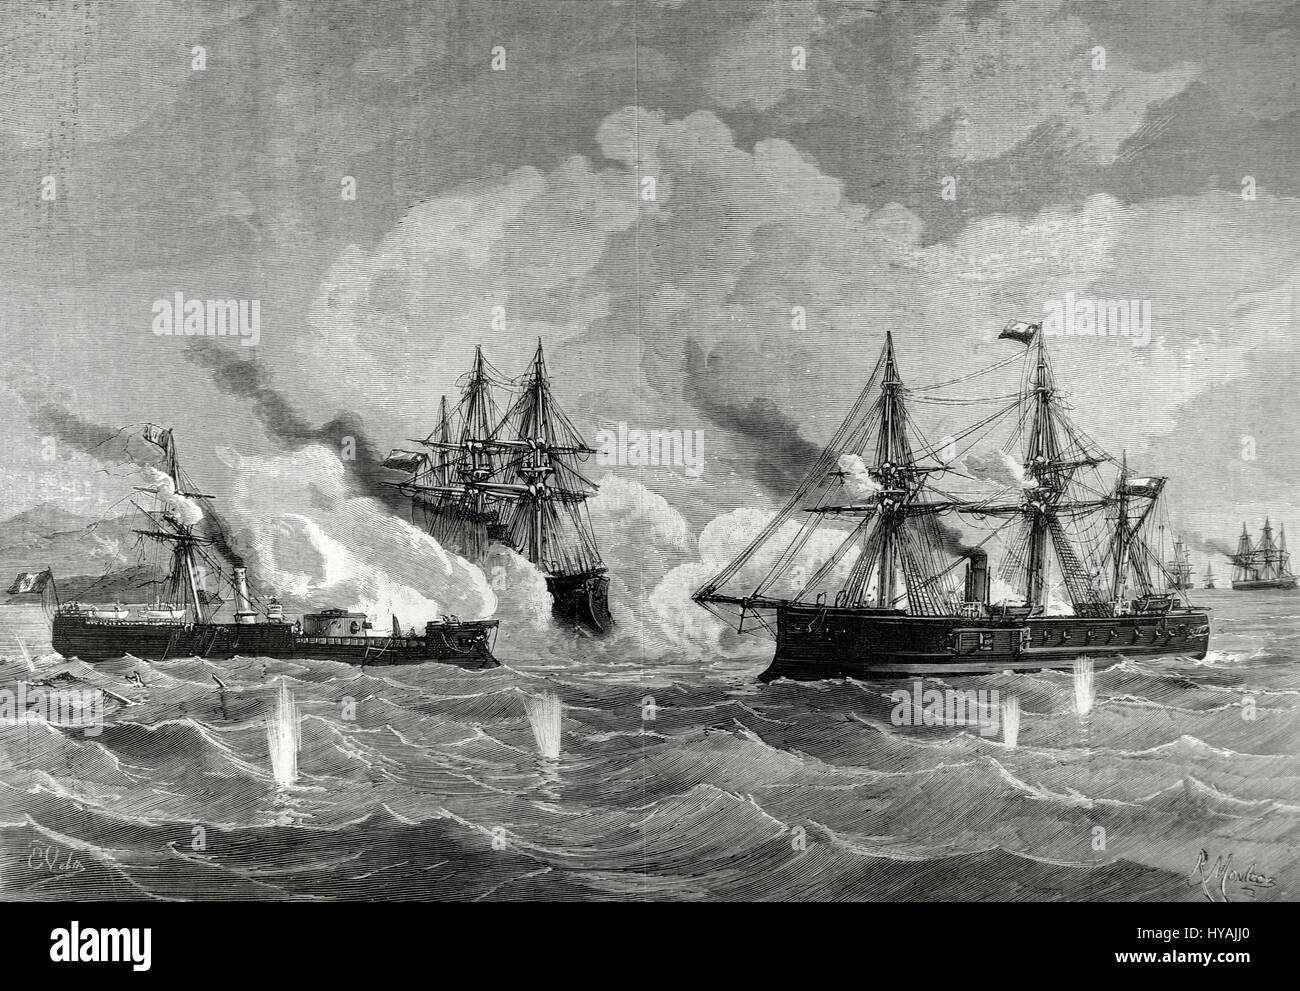 War of the Pacific.1879-1883. Conflict between Chile and Peru and Bolivia. Naval combat. Huascar ship against the Chilean Blanco Escalada and Cochrane ships in port of Mejillones, October 8, 1879. Engraving by Eugenio Vela. La Ilustracion Espanola y Americana, 1879. Stock Photo